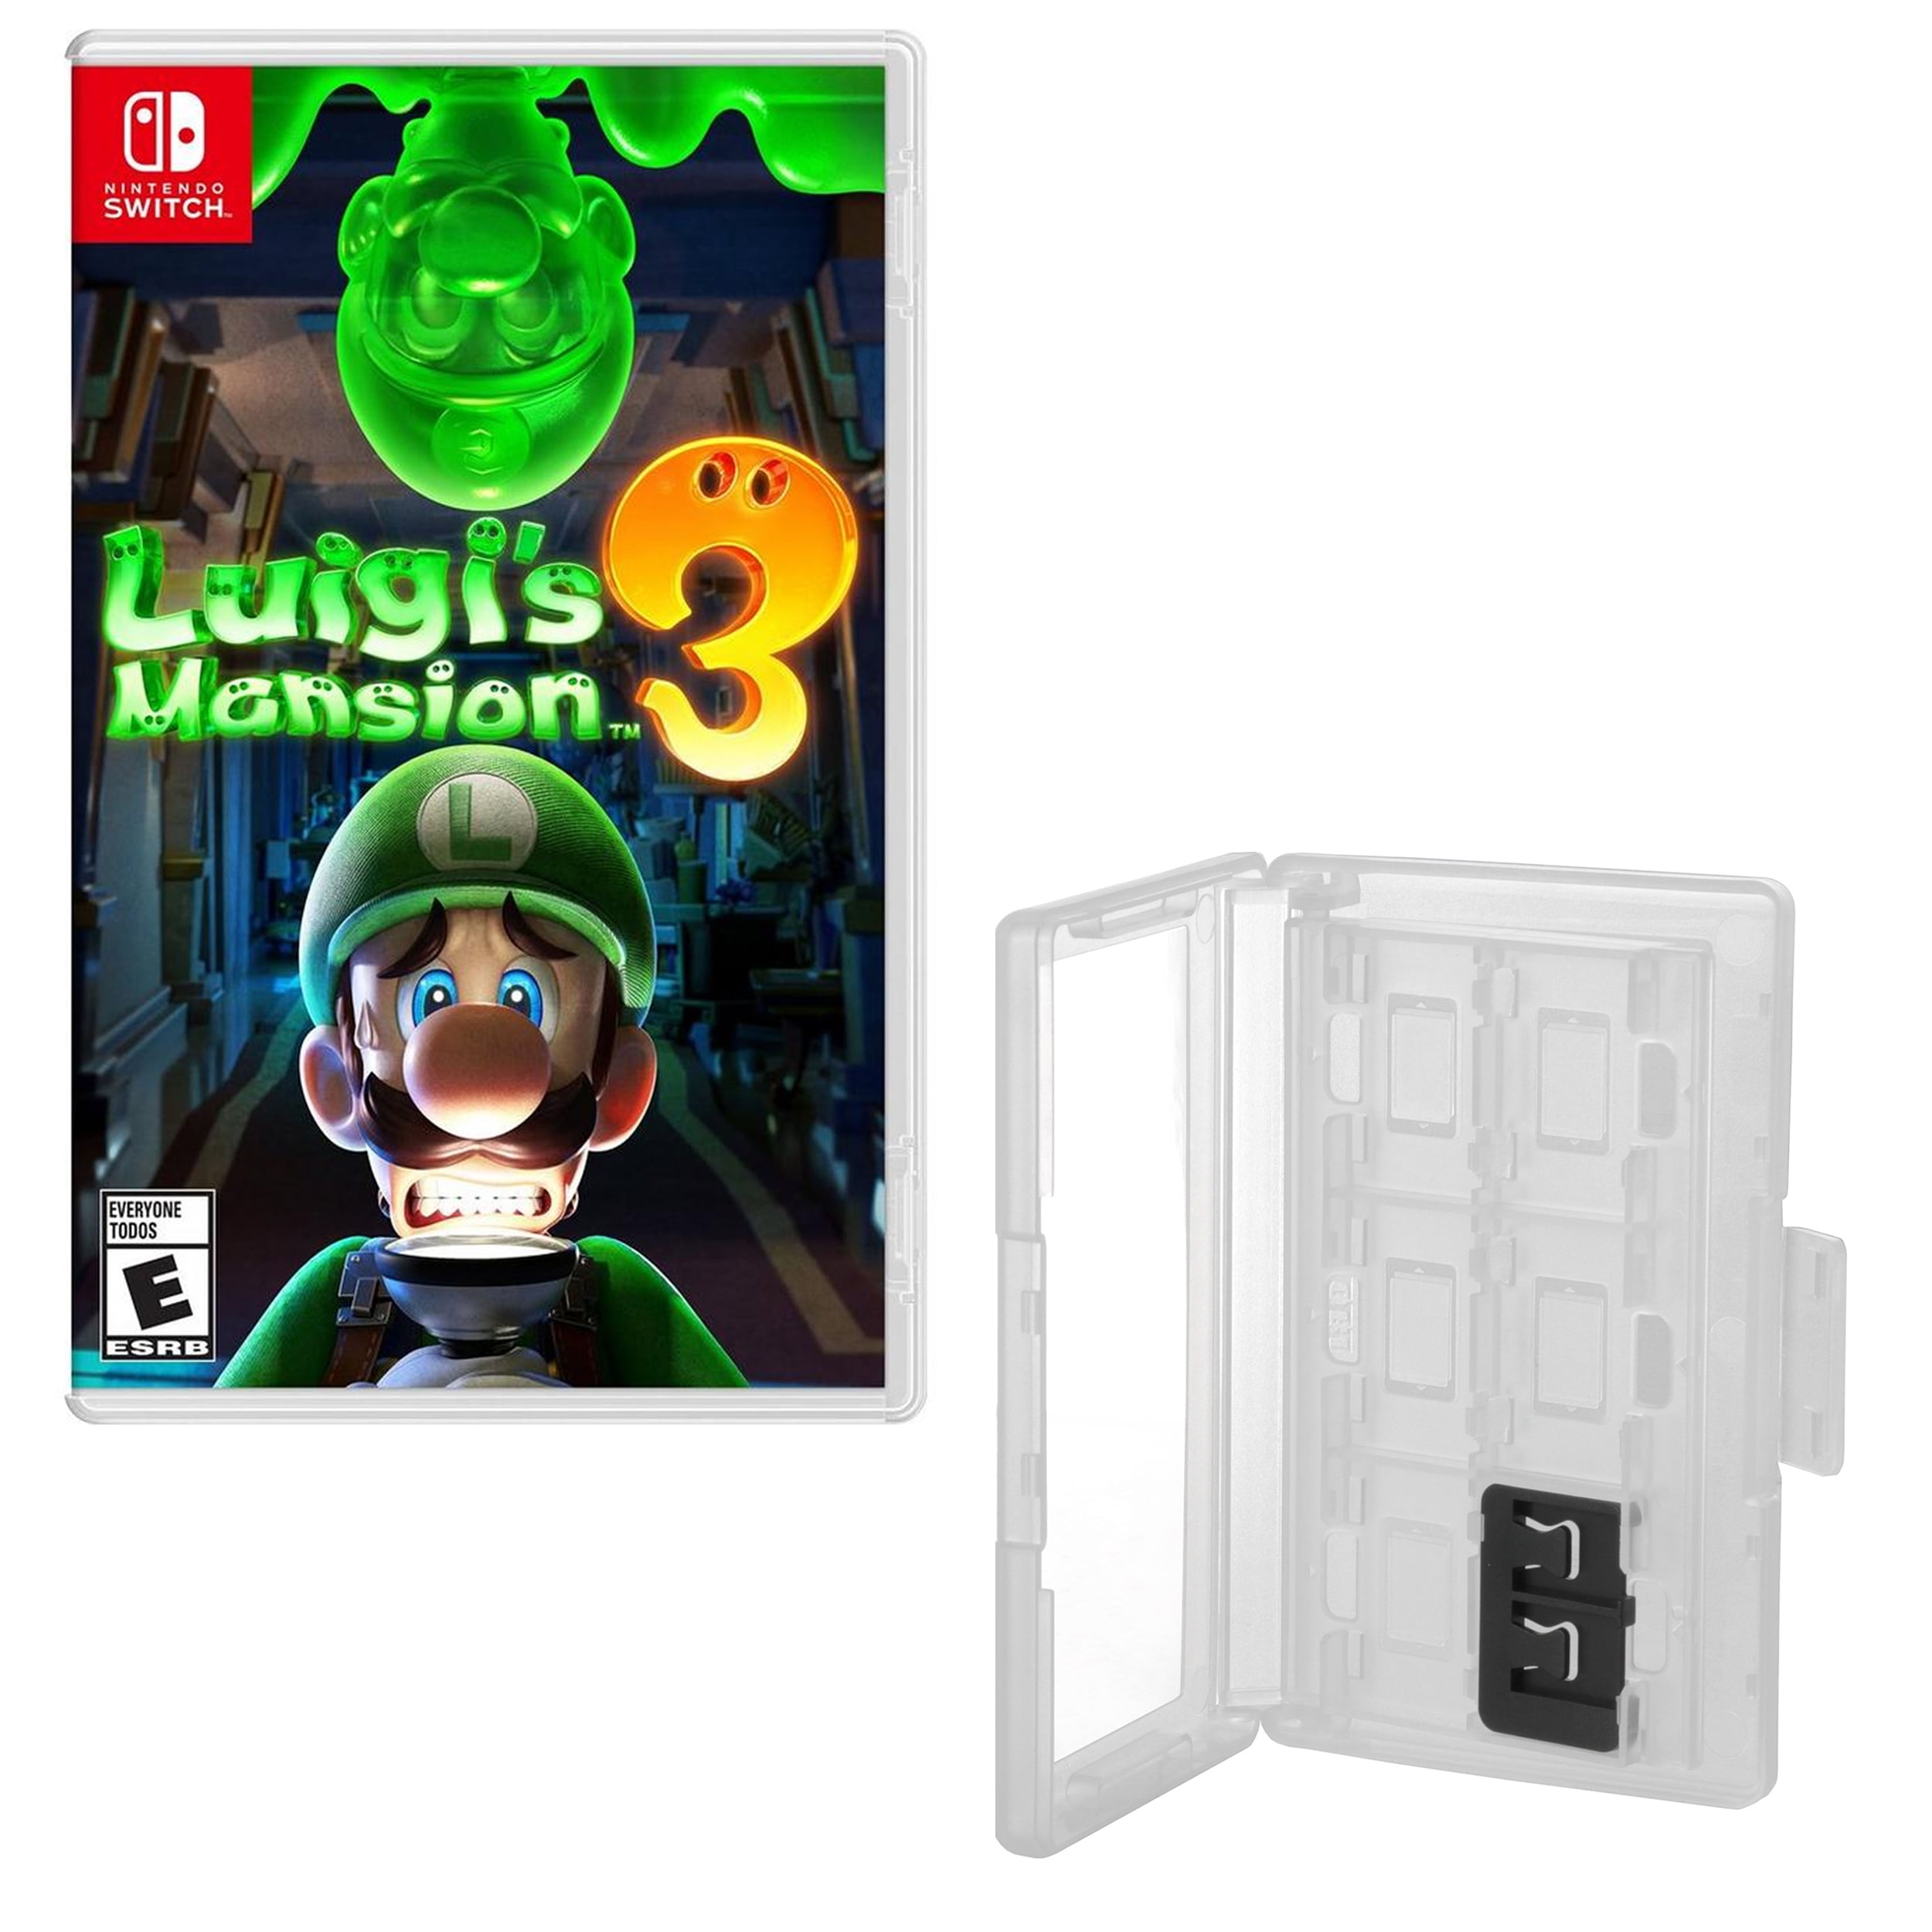 12 for Switch for Mansion Caddy 3 Luigi\'s Games with Nintendo Game